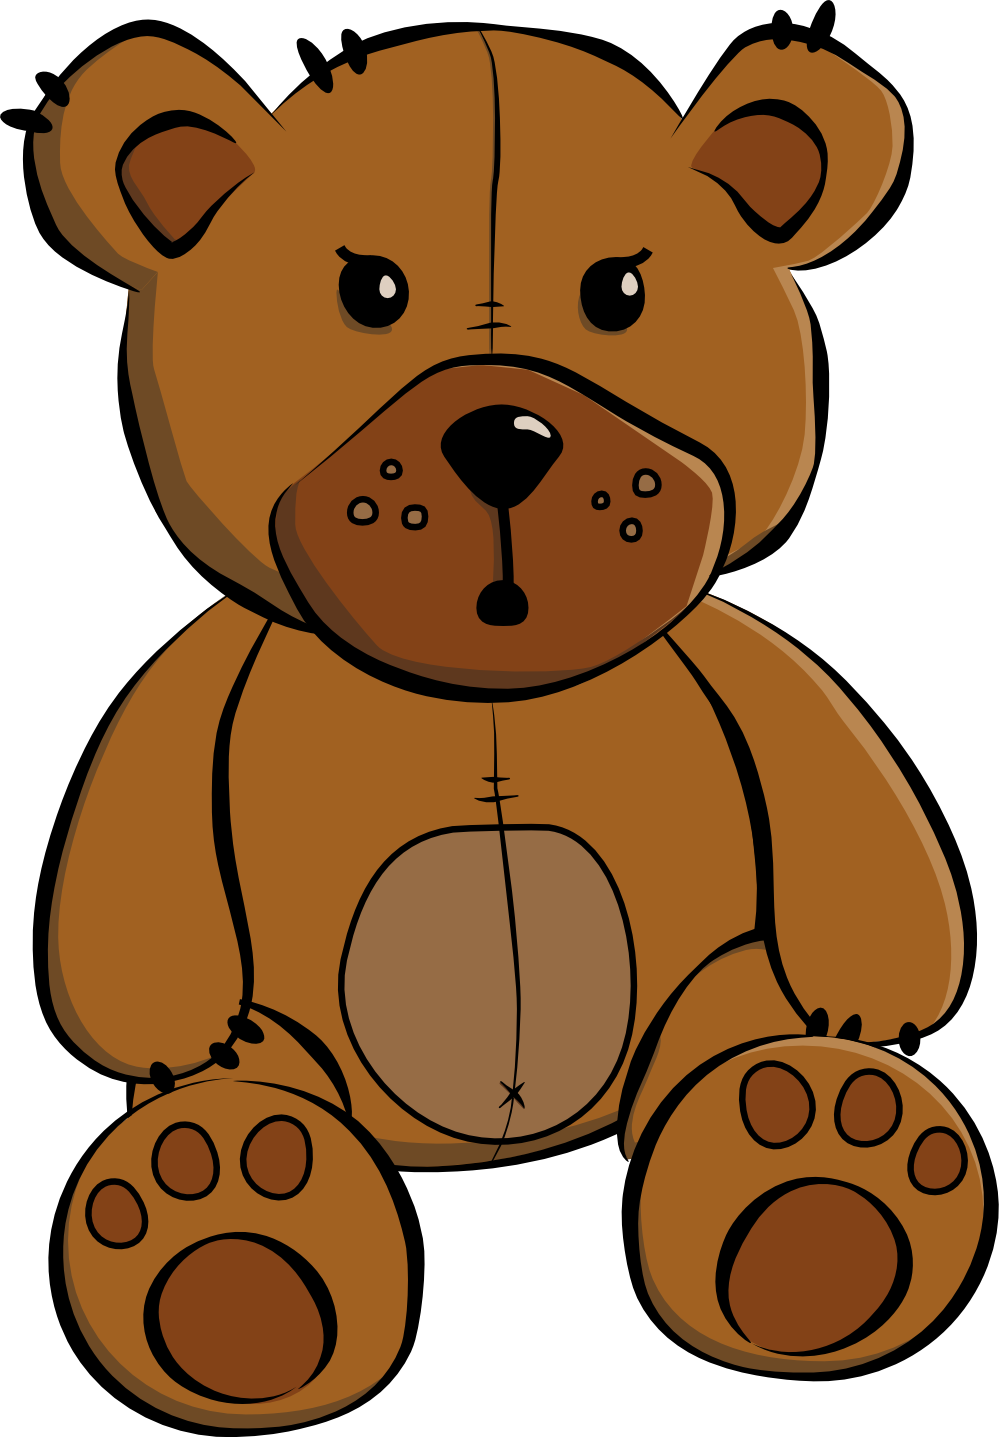 Cute Teddy Bear Cliparts - Cliparts and Others Art Inspiration